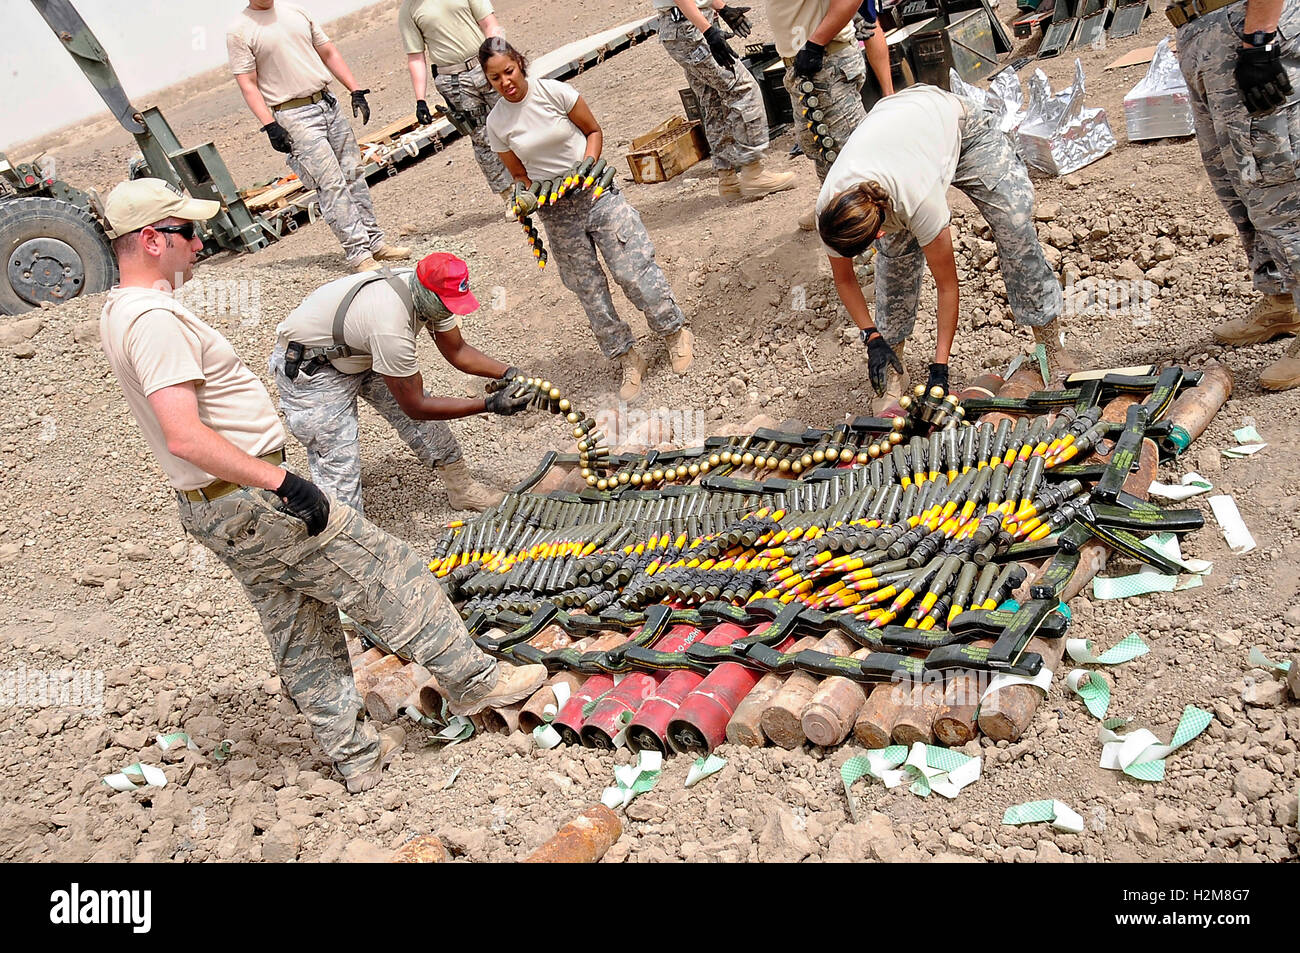 U.S. soldiers prepare confiscated munitions for a controlled detonation at Ali Base April 30, 2009 near Nasiriyah, Iraq. Stock Photo